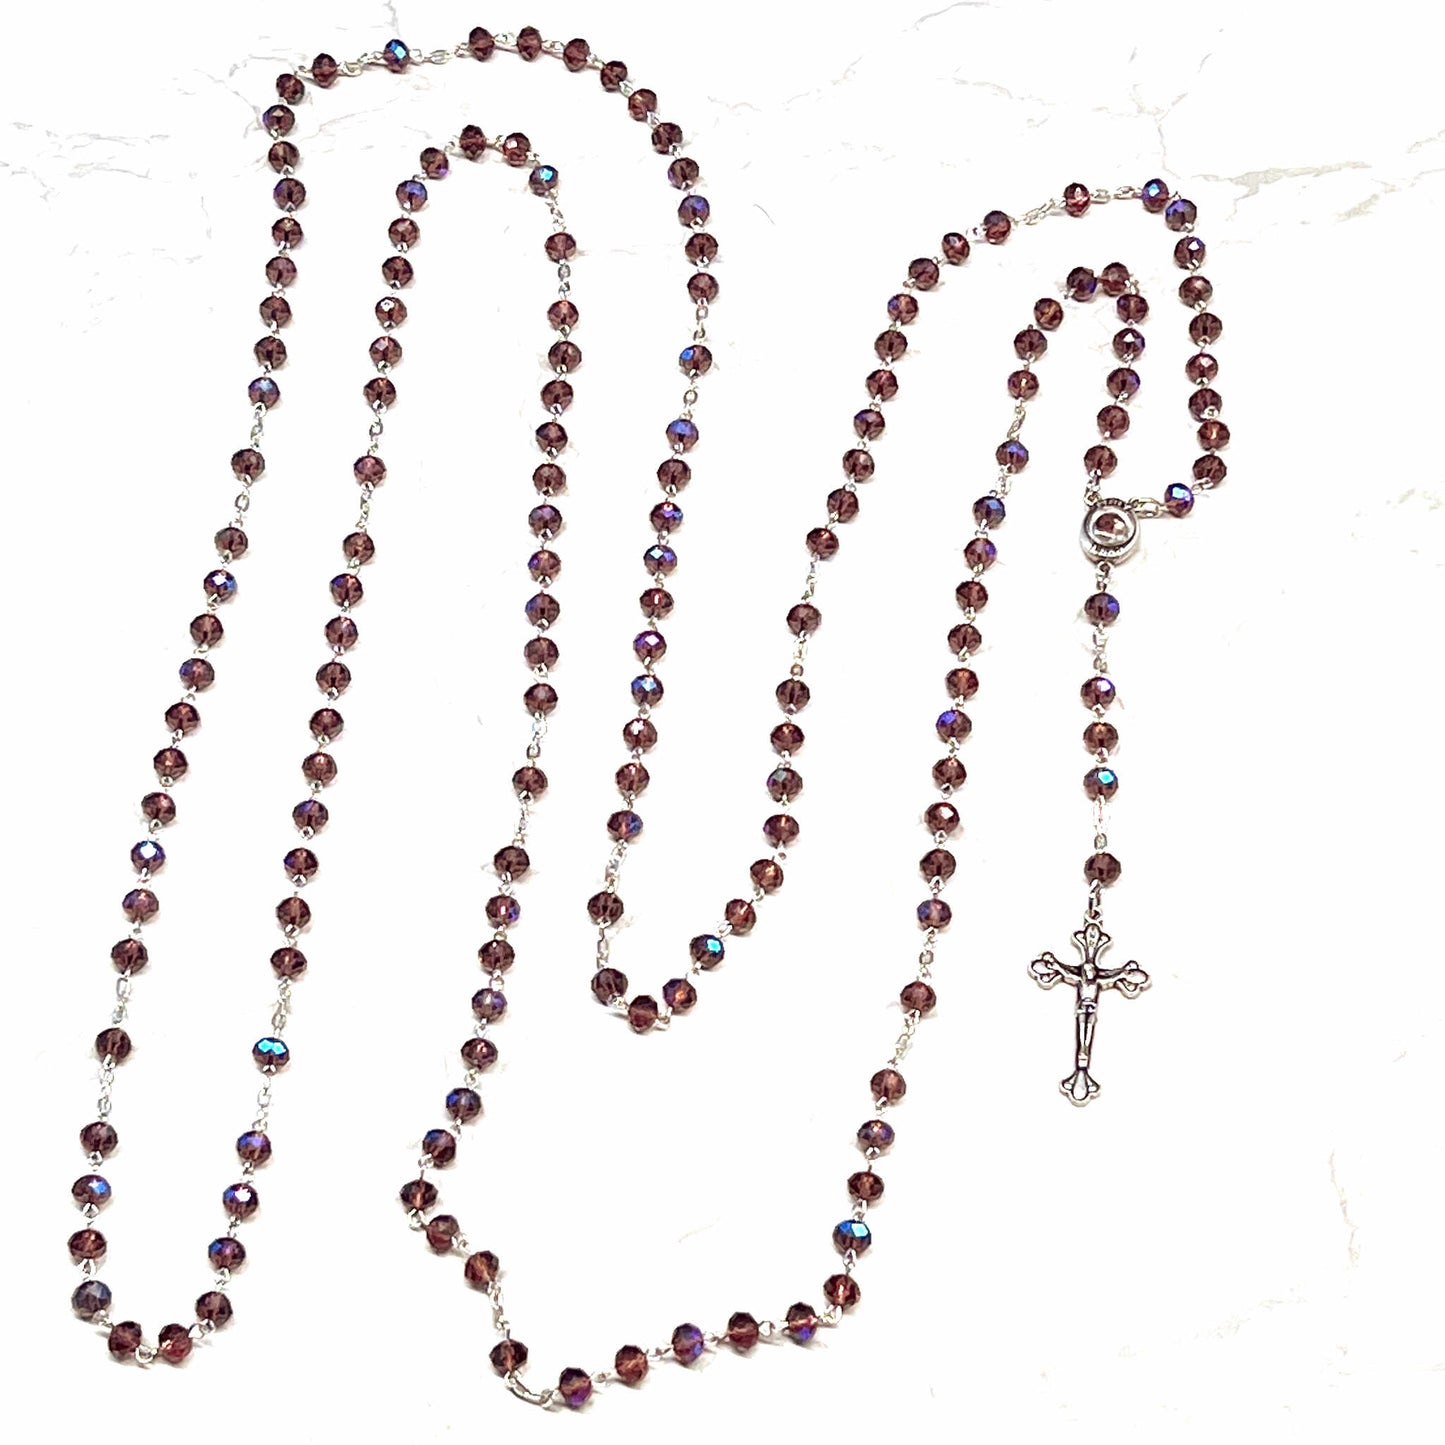 15 Decade Wall Rosary with Purple Crystal Beads